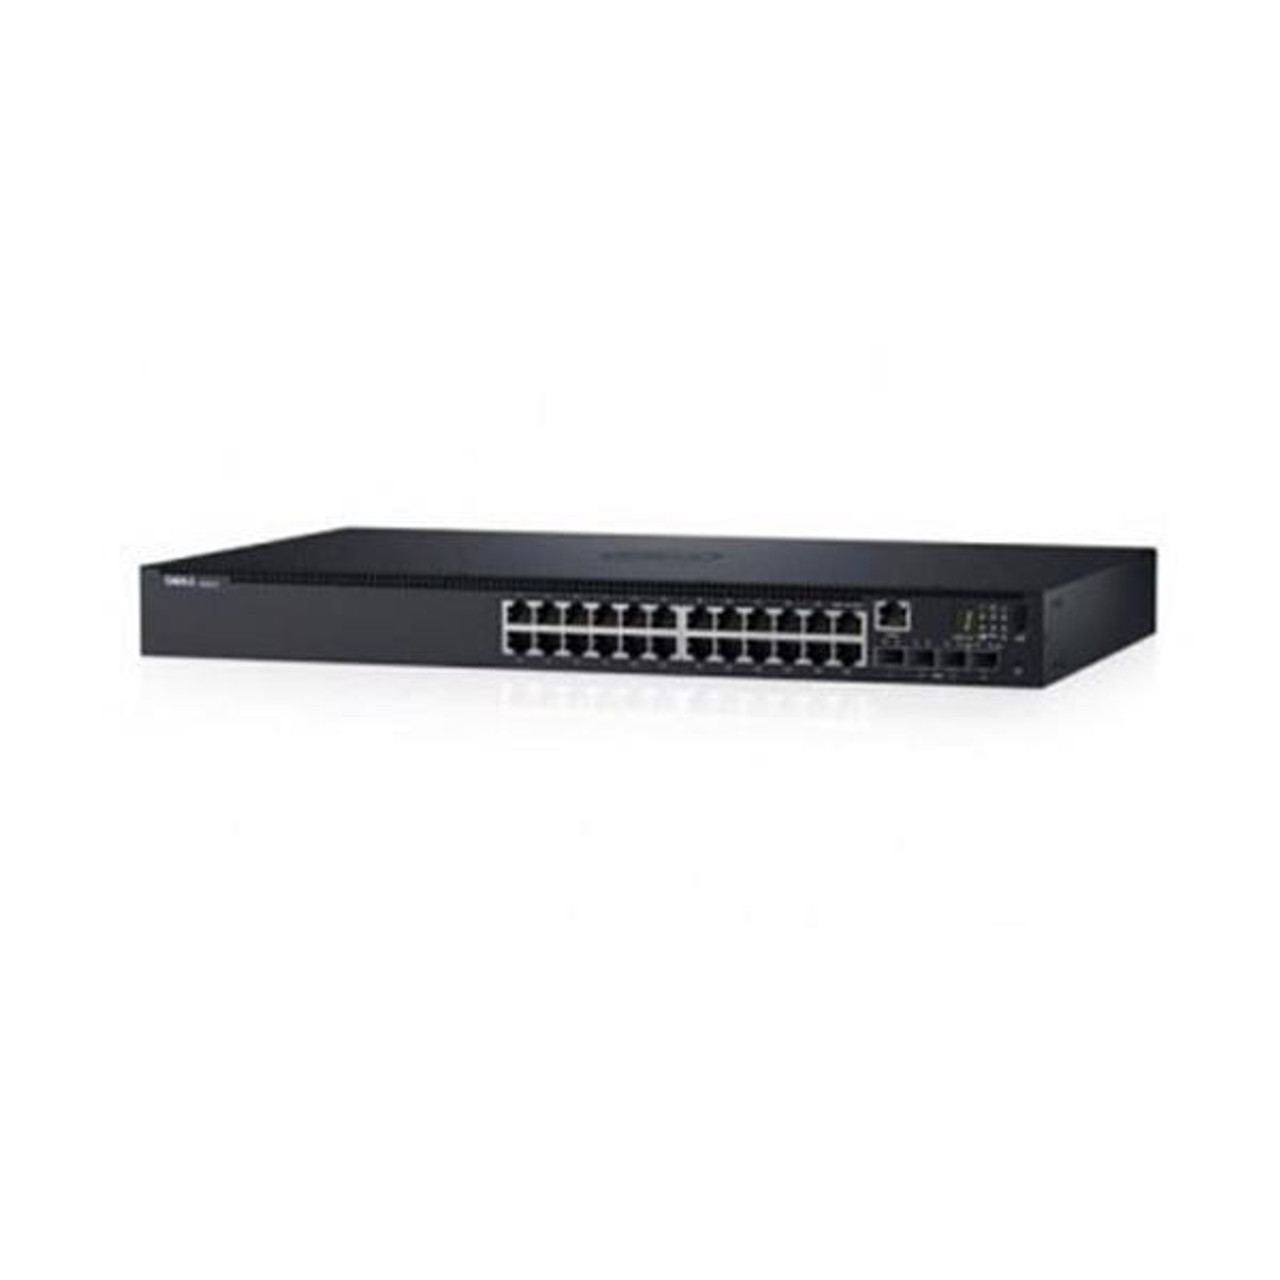 DN_N1524_1.1 Dell N1524 Ethernet Switch - 24 Ports - Manageable - Gigabit Ethernet, 10 Gigabit Ethernet - 1000Base-T, 10GBase-X - 3 Layer Supported - Modular -